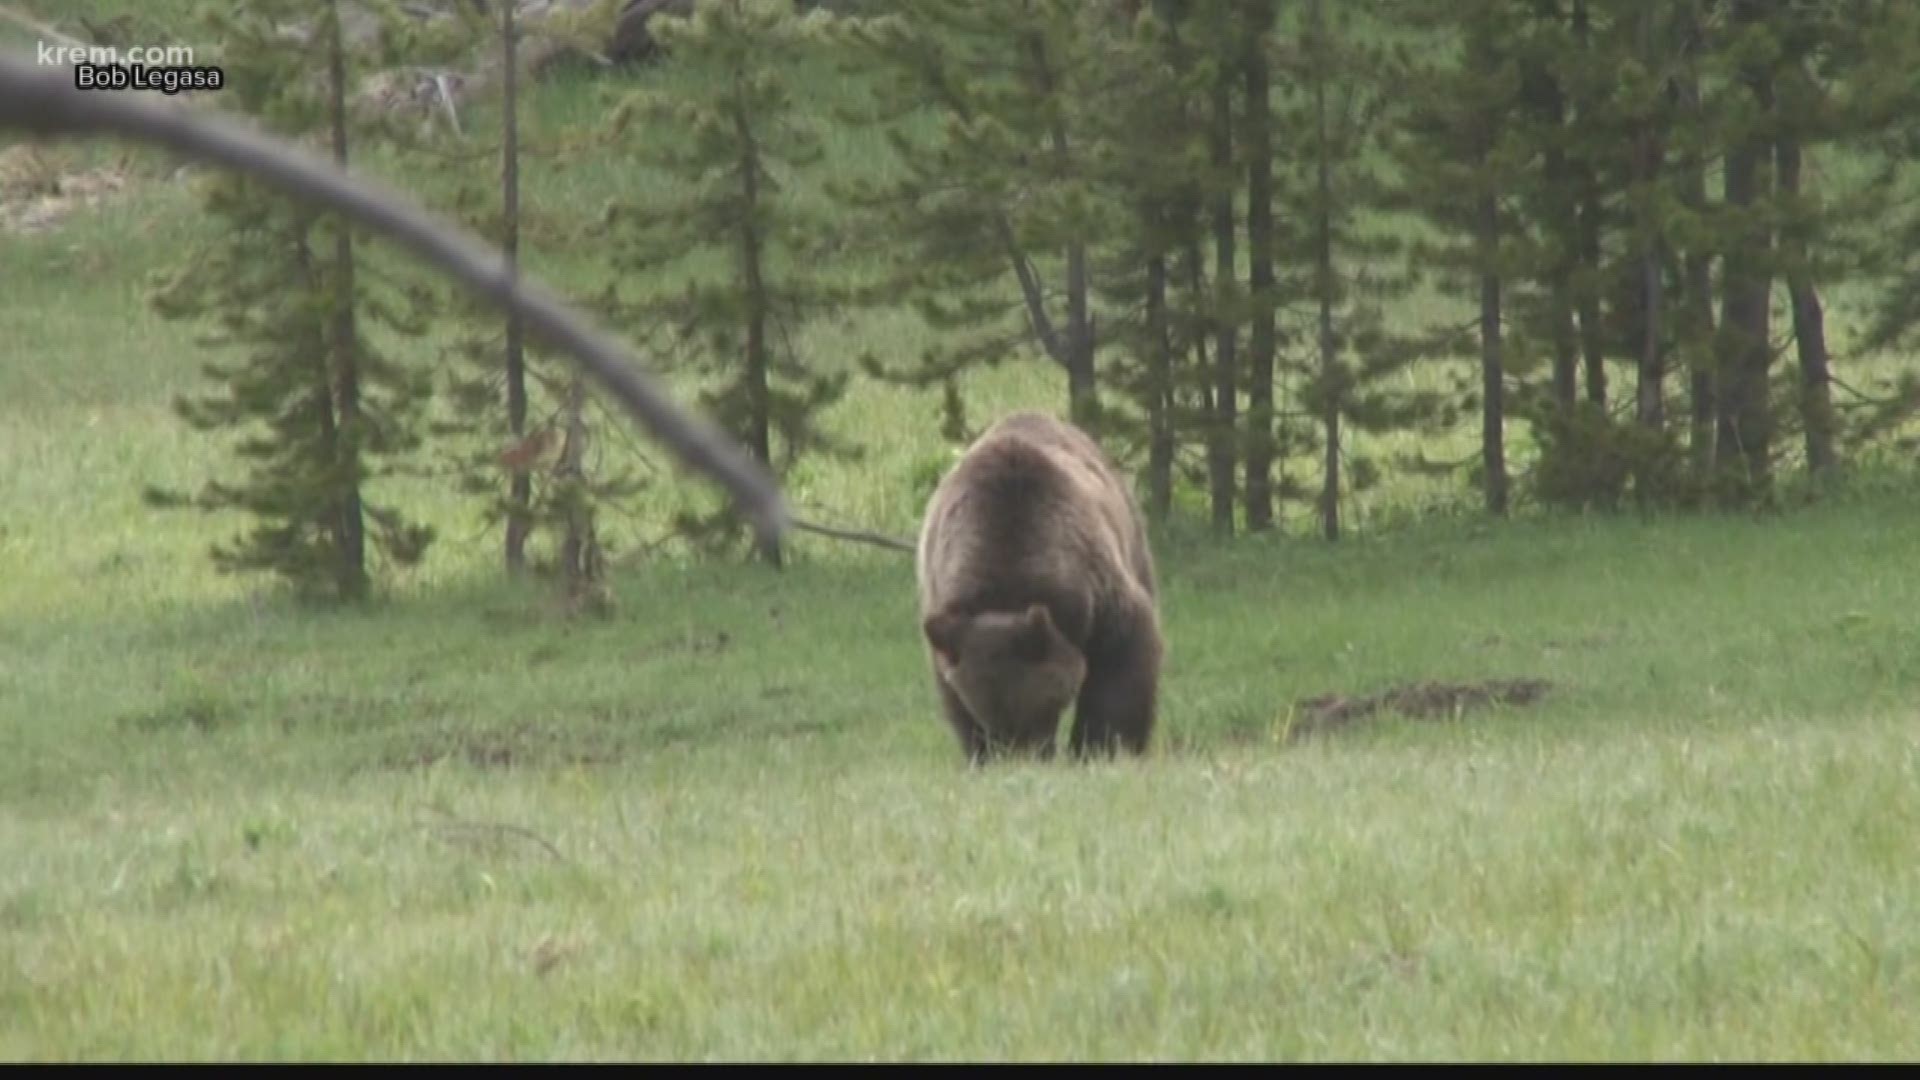 Hayden man mauled by grizzly to appear on 'Animal Planet' show 